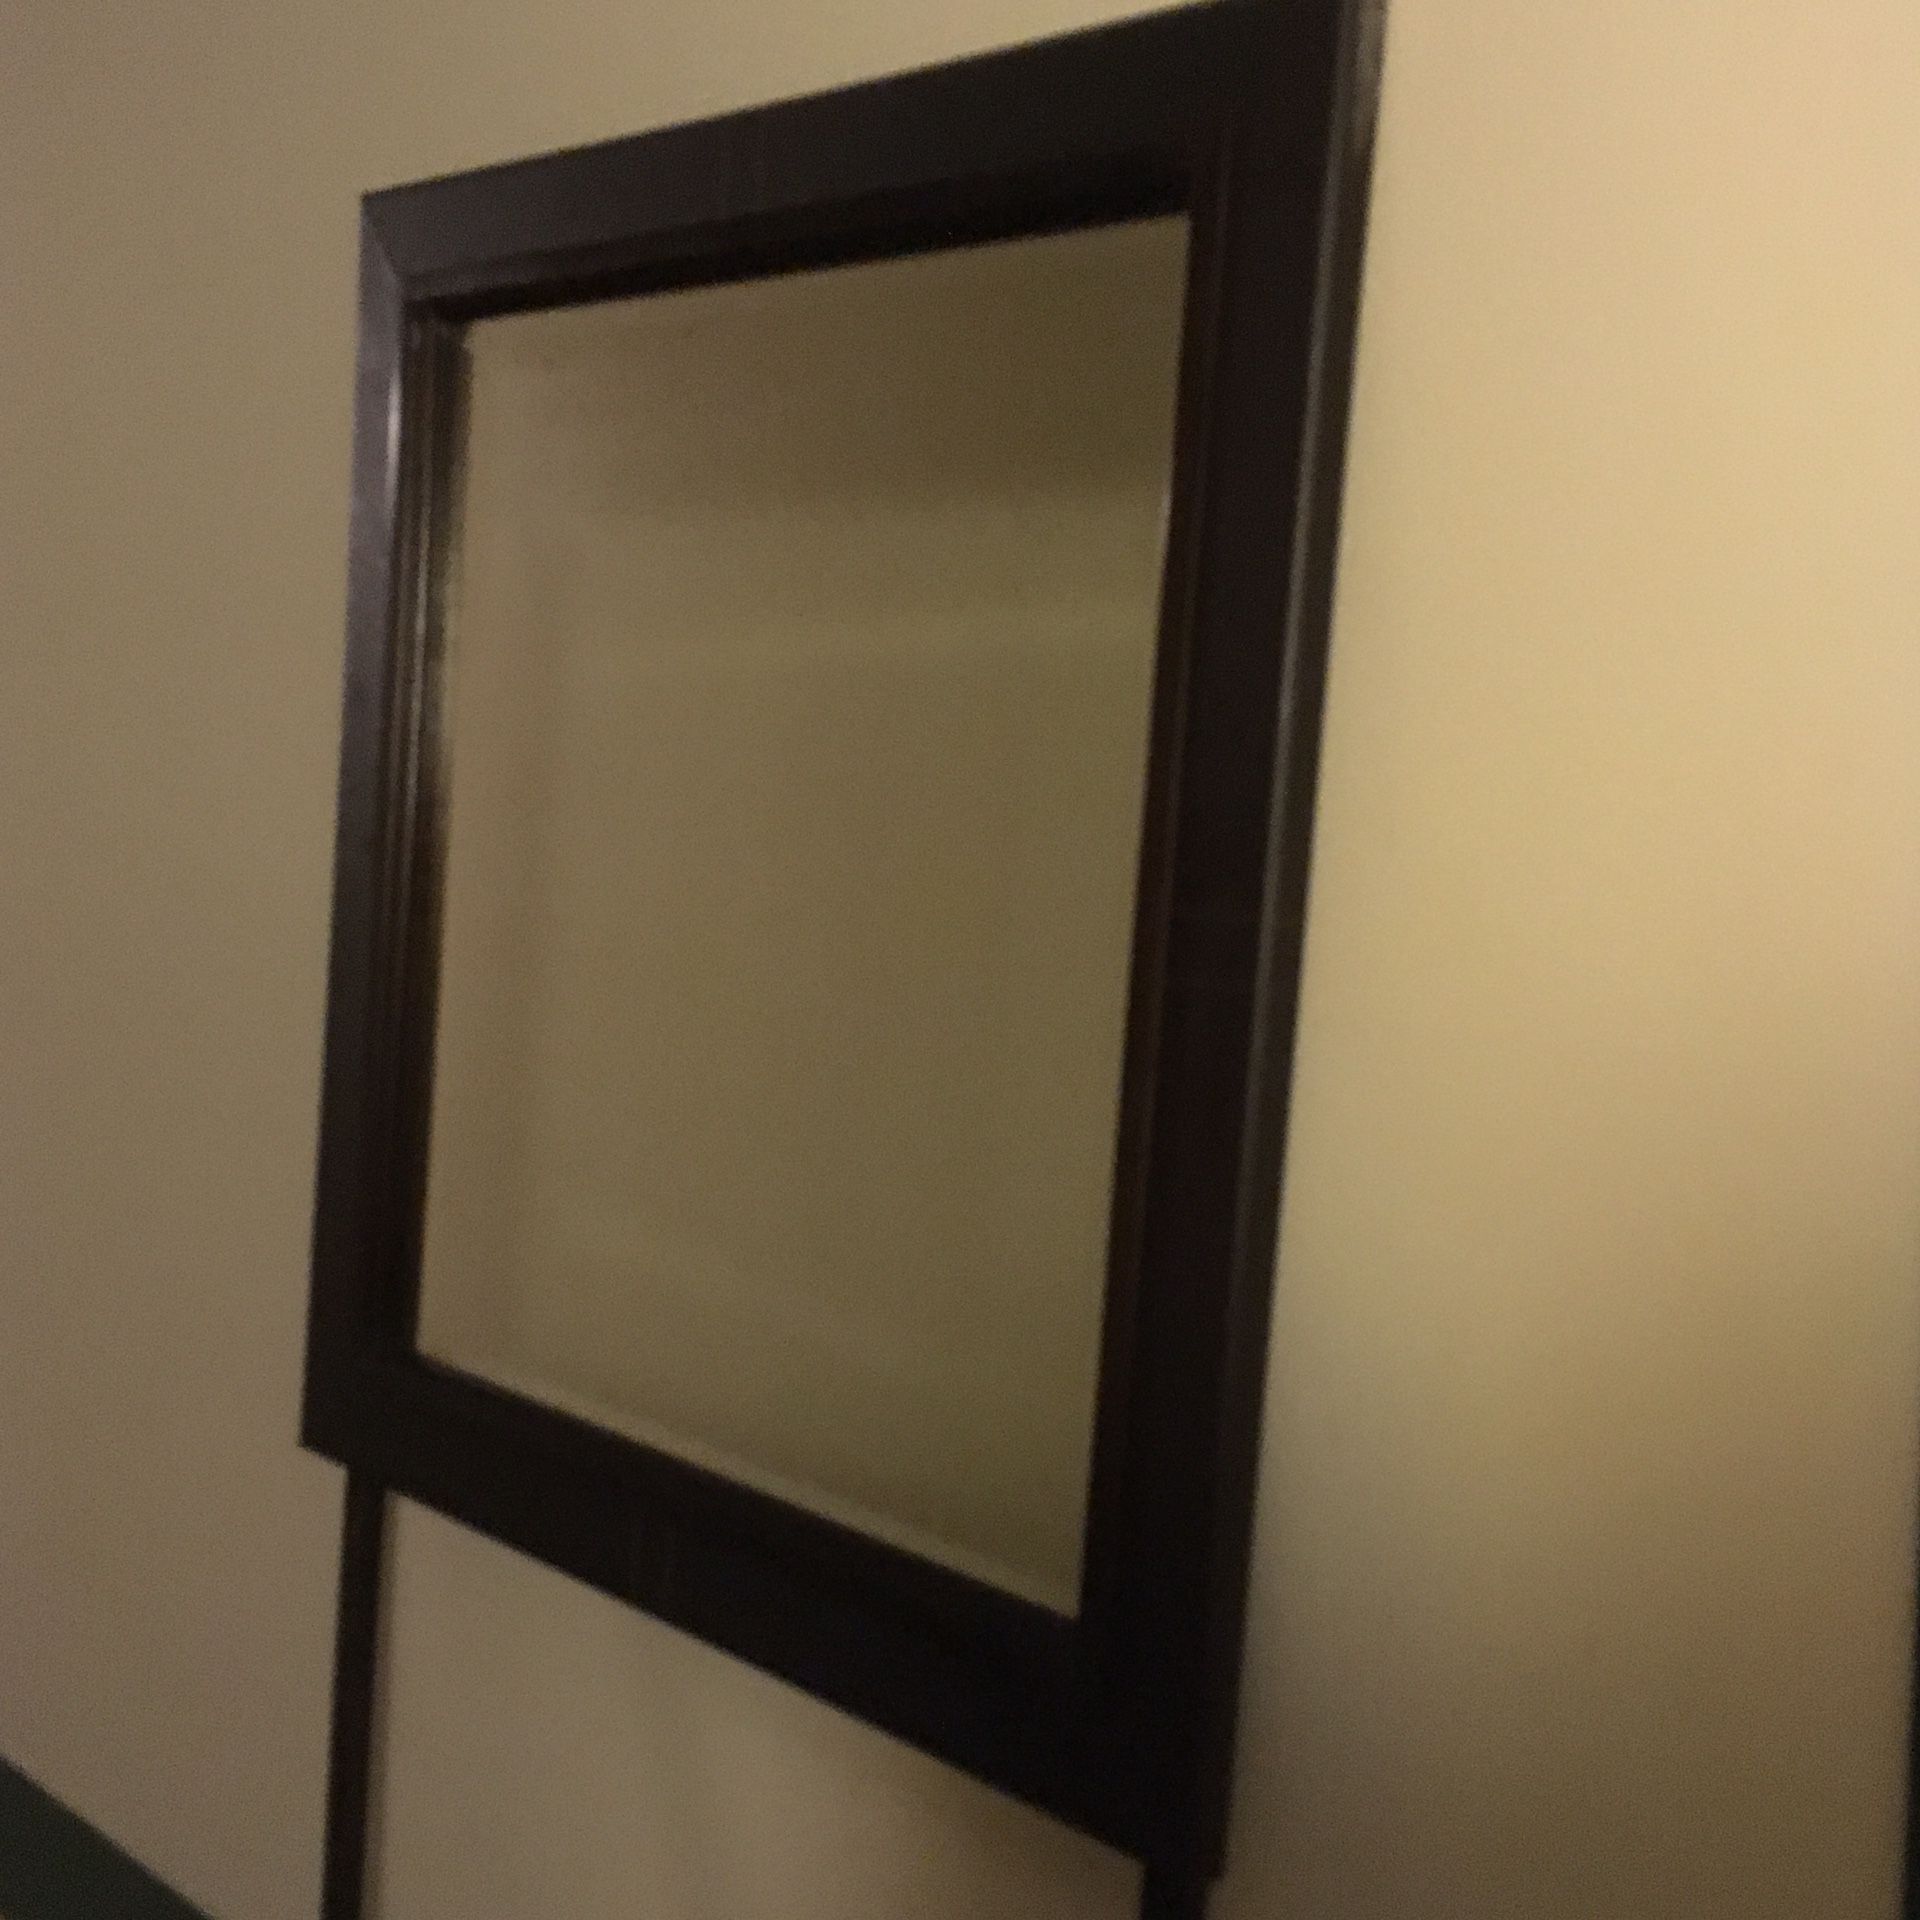 Dark chocolate brown faux leather and wood mirror